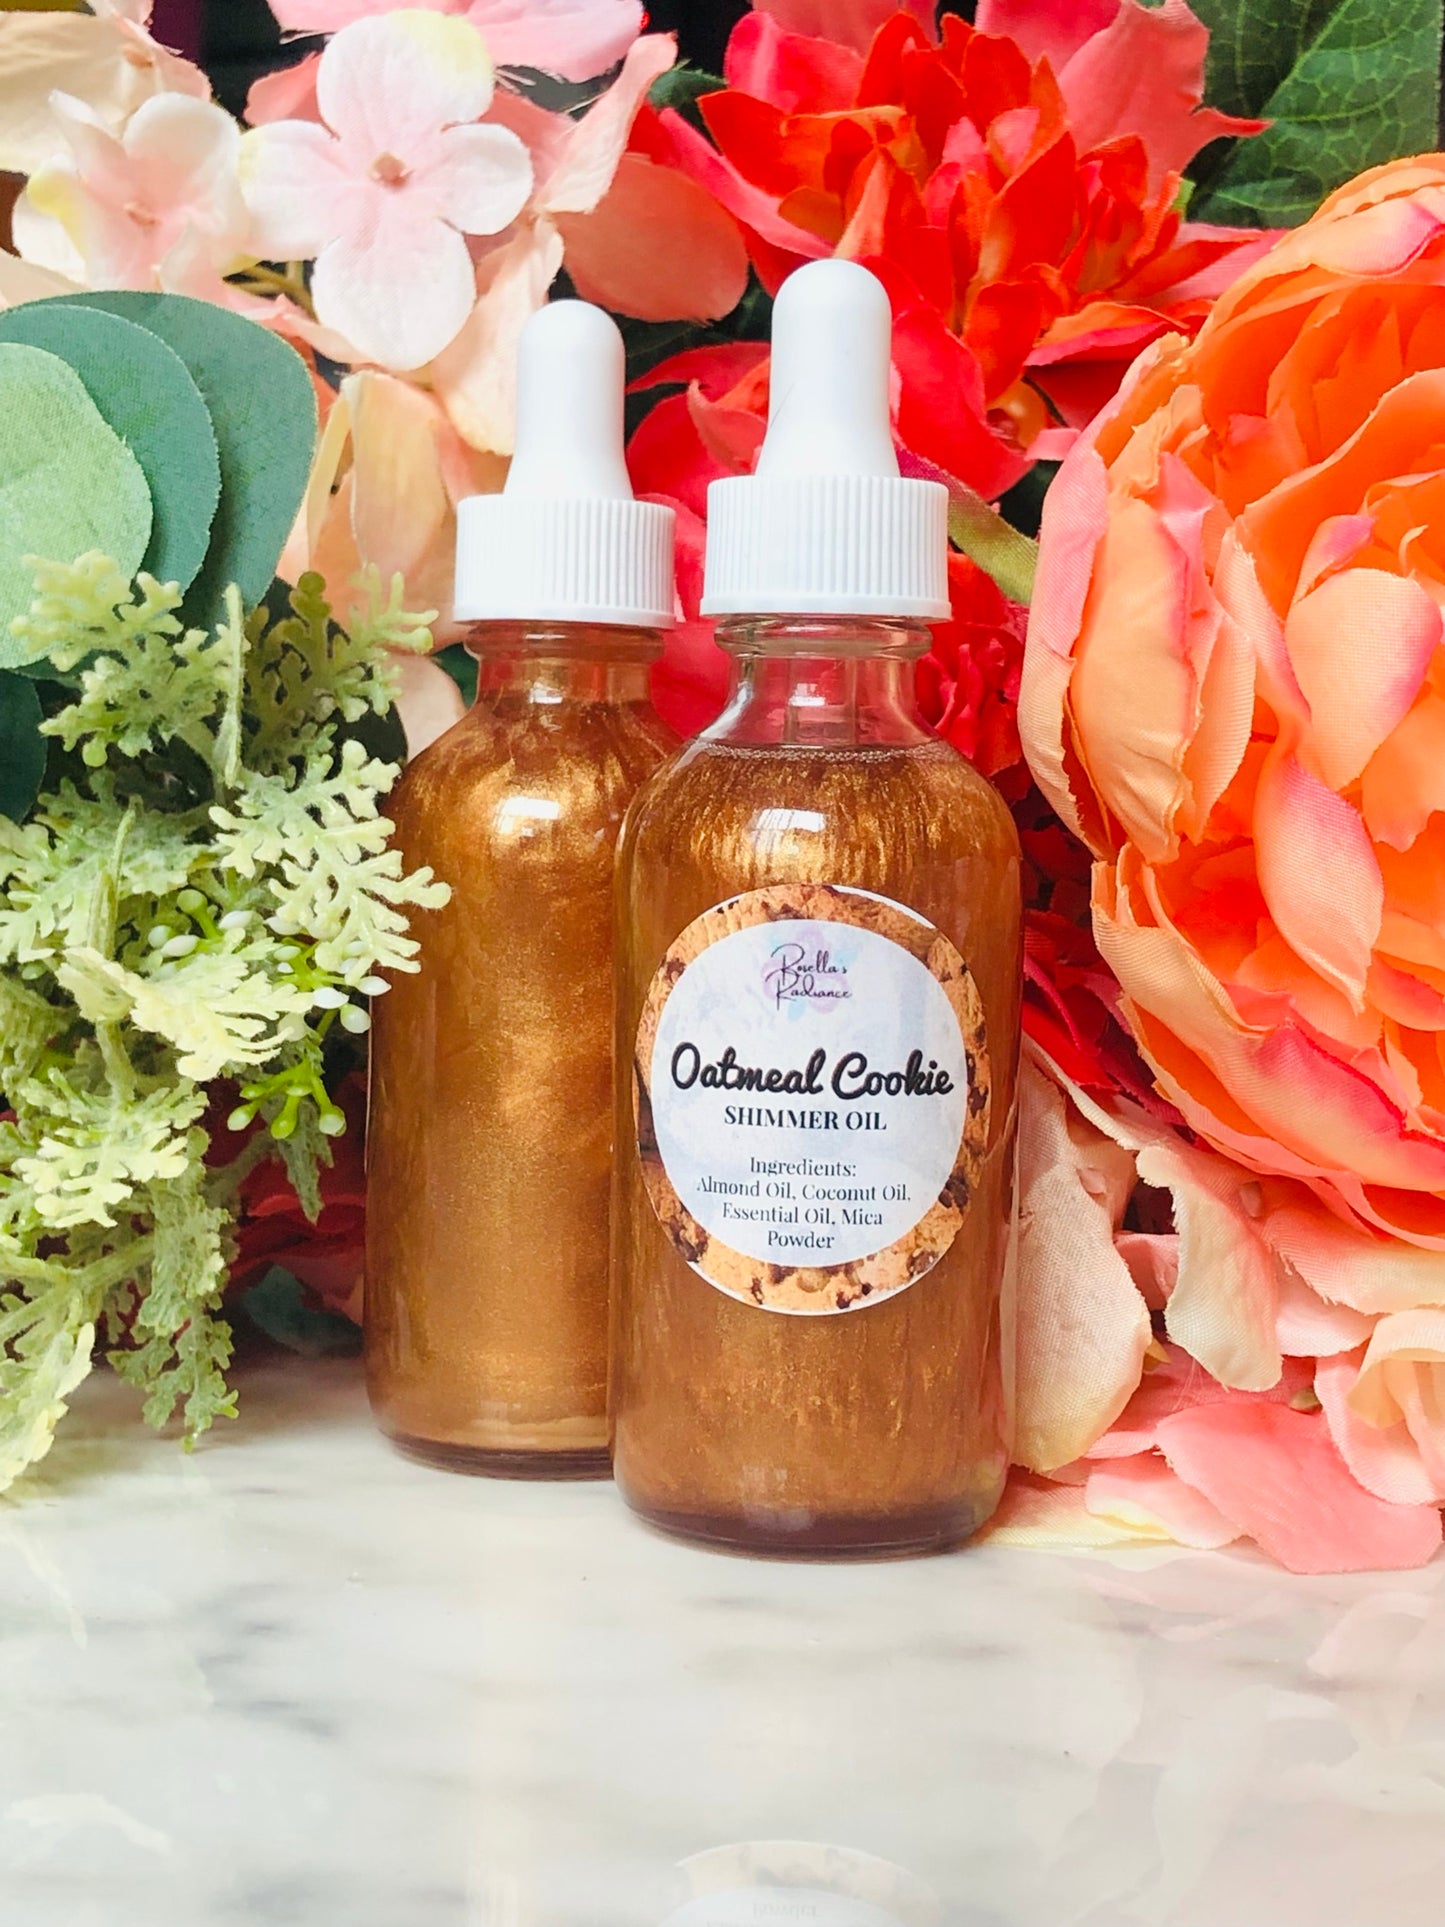 Oatmeal Cookie Shimmer Oil